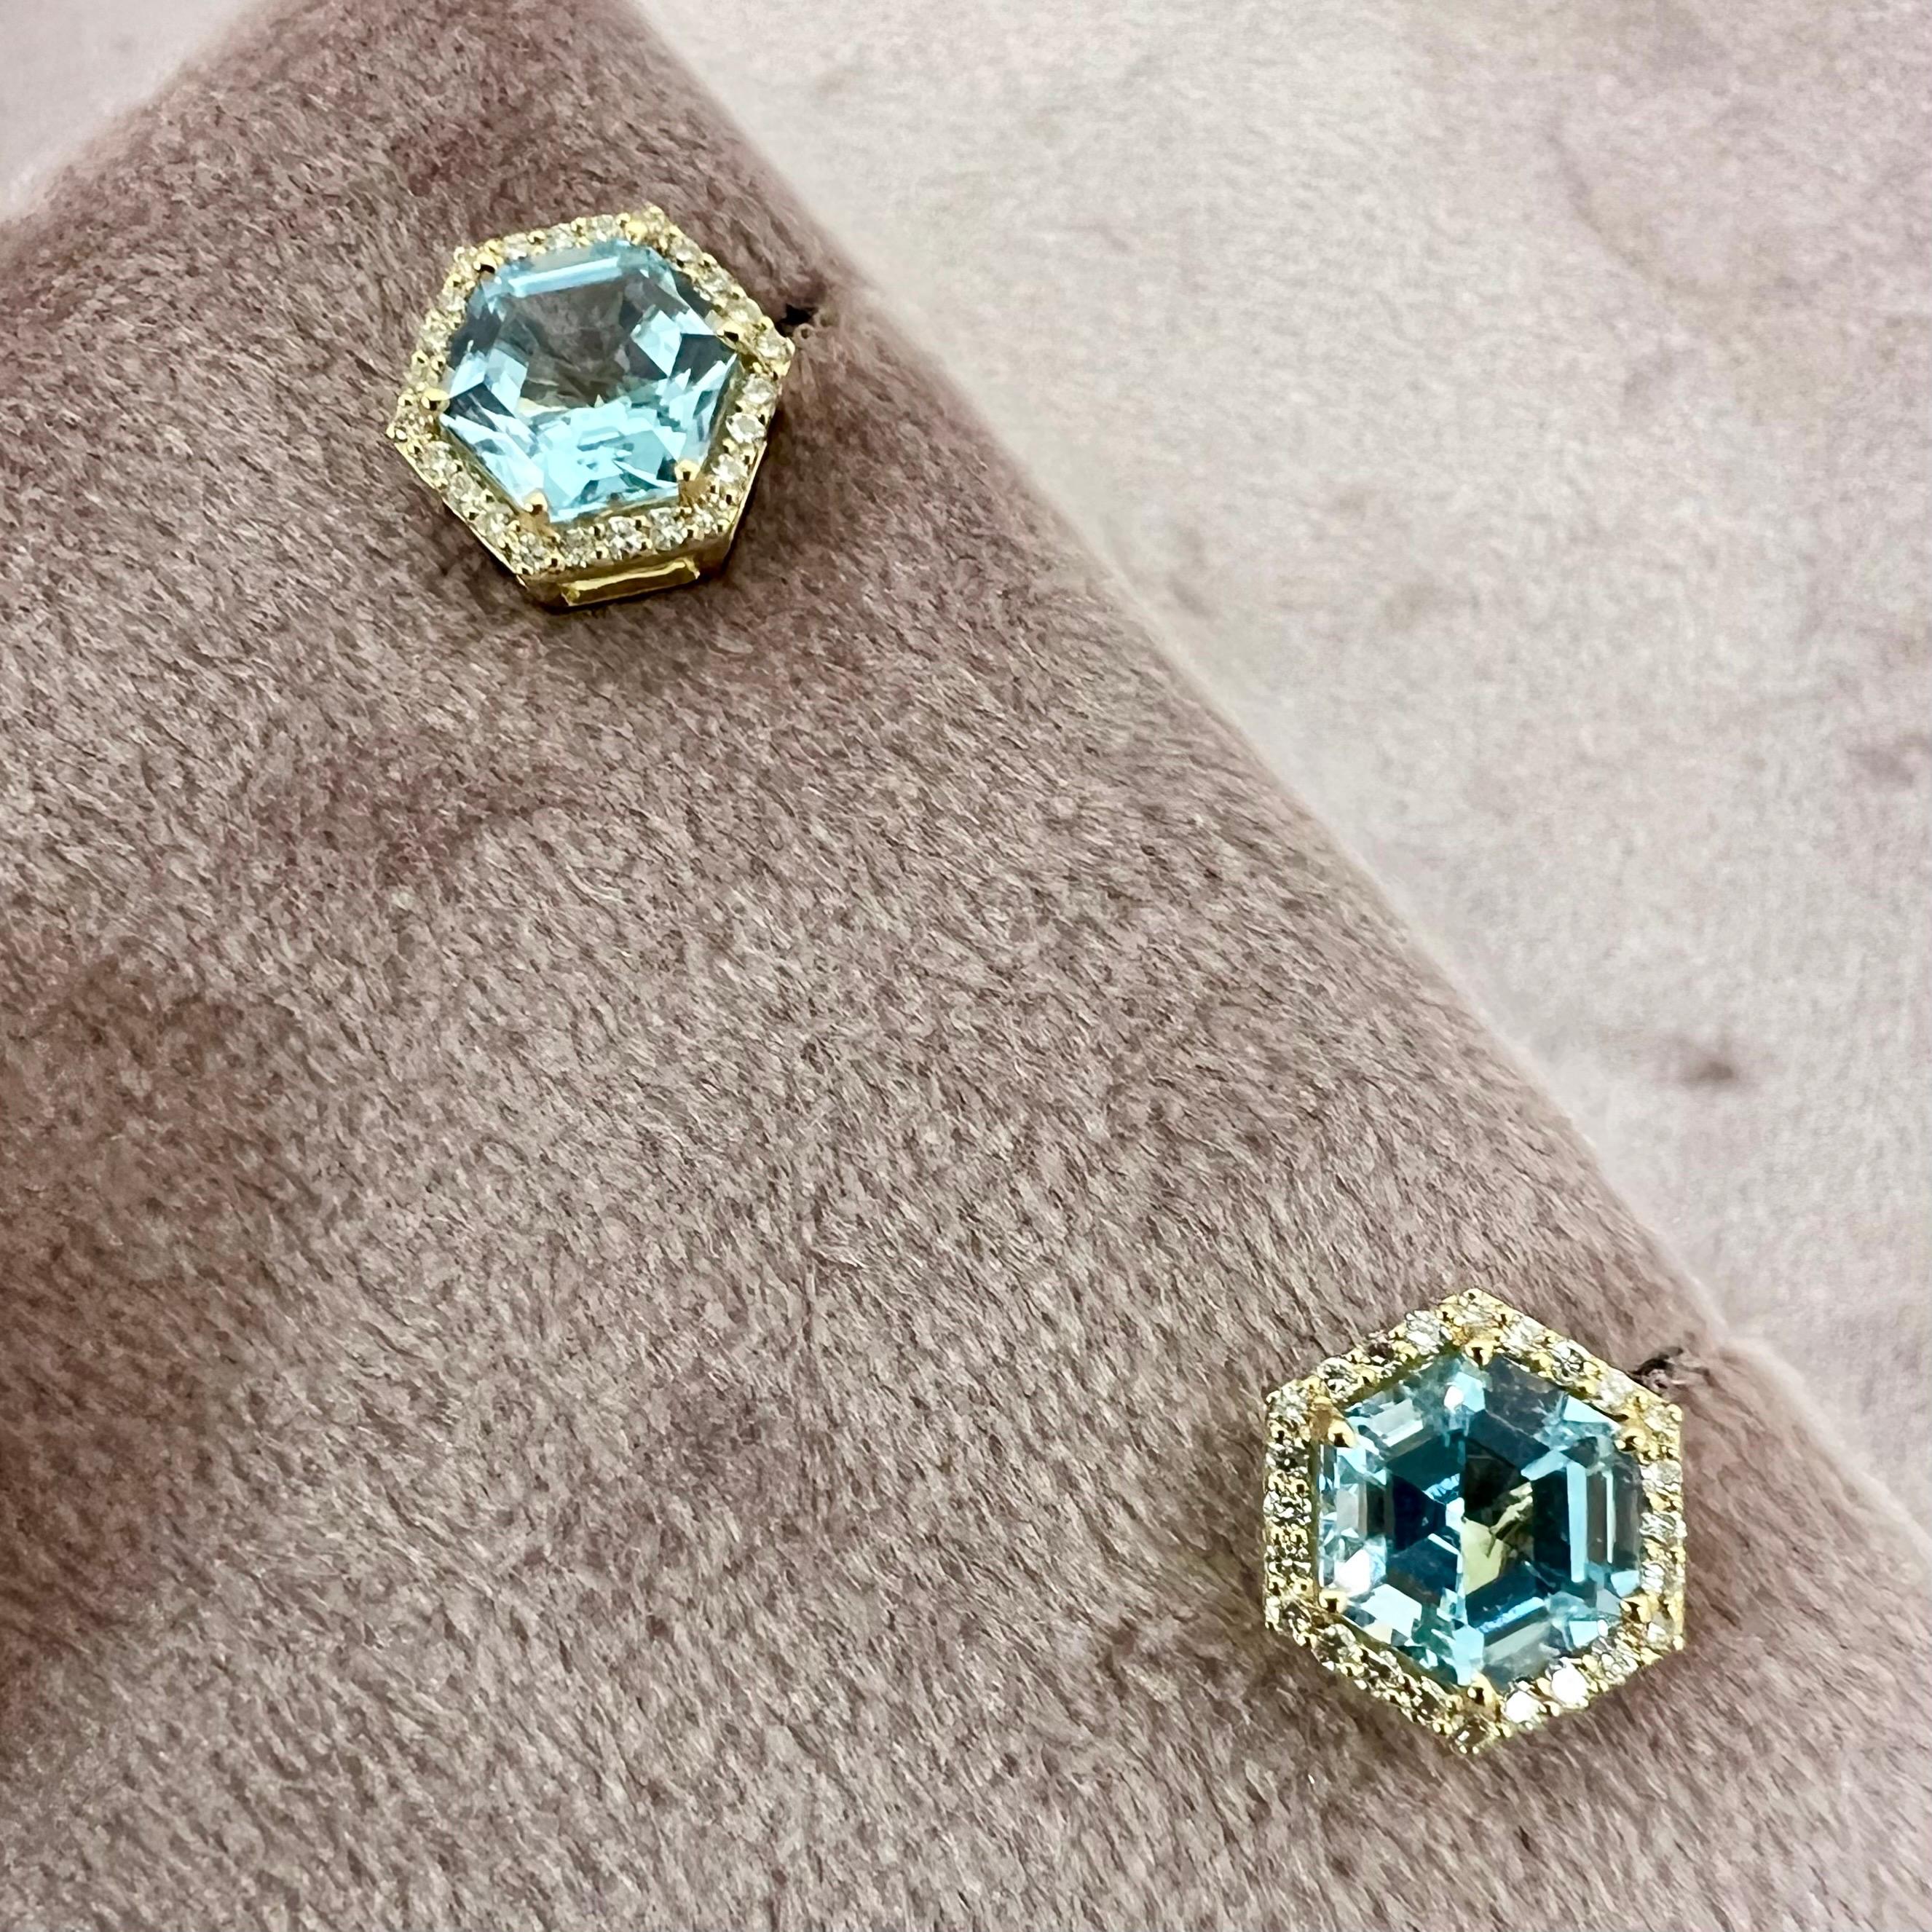 Created in 18 karat yellow gold
Blue topaz 3 carats approx.
Diamonds 0.20 carat approx.
Post backs for pierced ears
Limited Edition

Crafted from 18 karat yellow gold, these luxurious earrings boast an exquisite blue topaz of approximately three